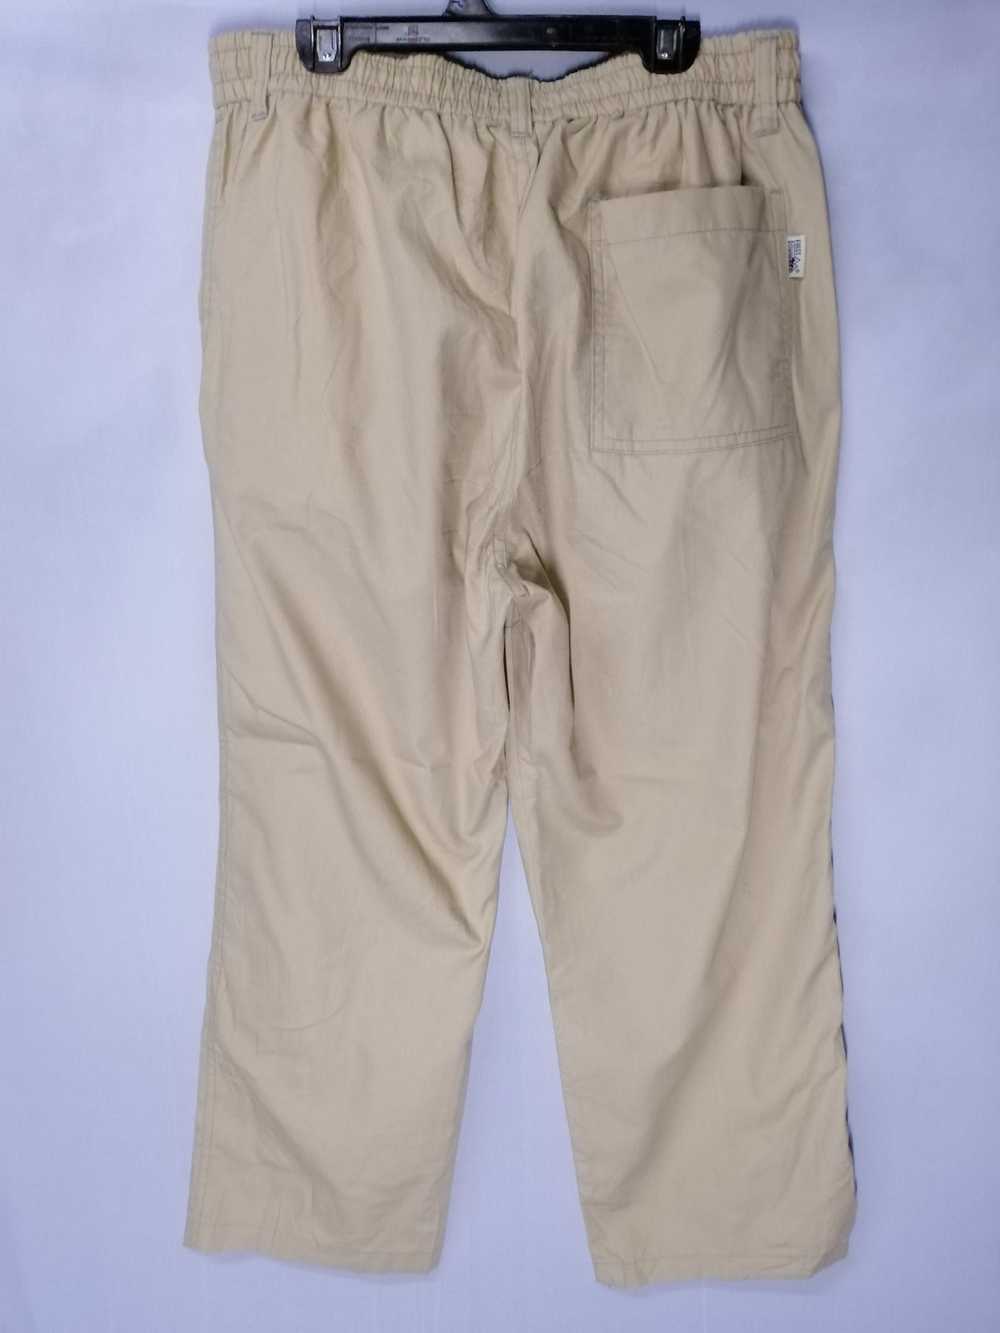 Japanese Brand First Down Crop Pant - image 3